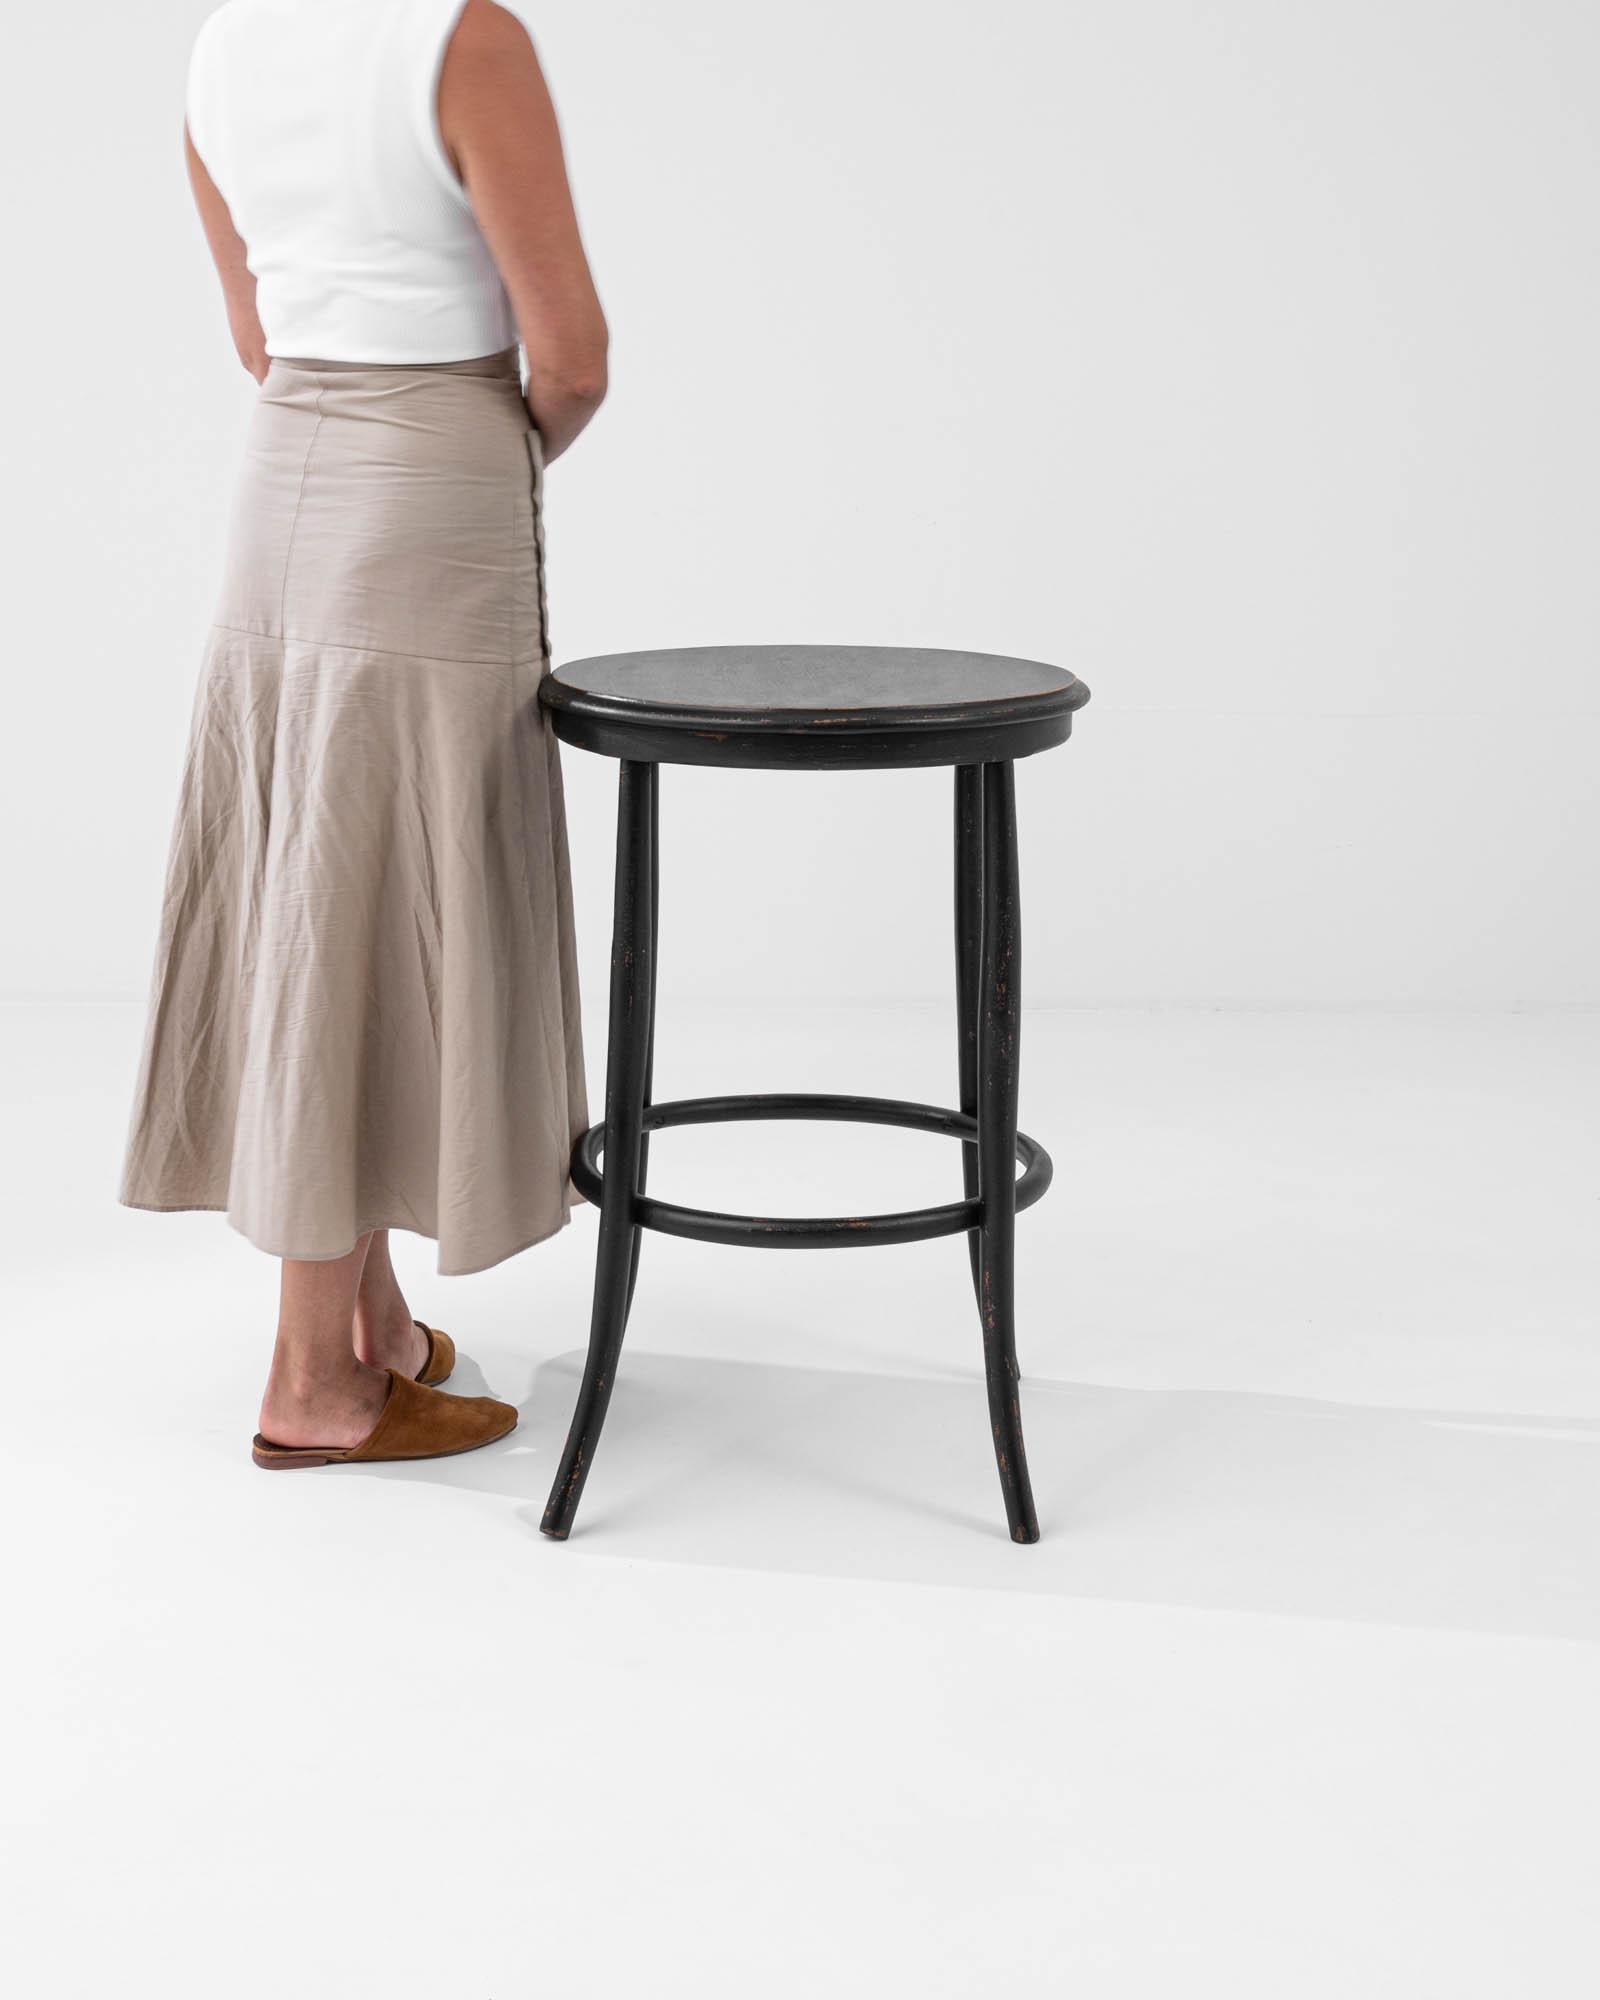 Infuse your space with timeless elegance using this 20th-century French wood black patinated side table. Its design, though simple, exudes sophistication. The circular seat, complemented by a matching rim near the legs, adds a touch of refinement.